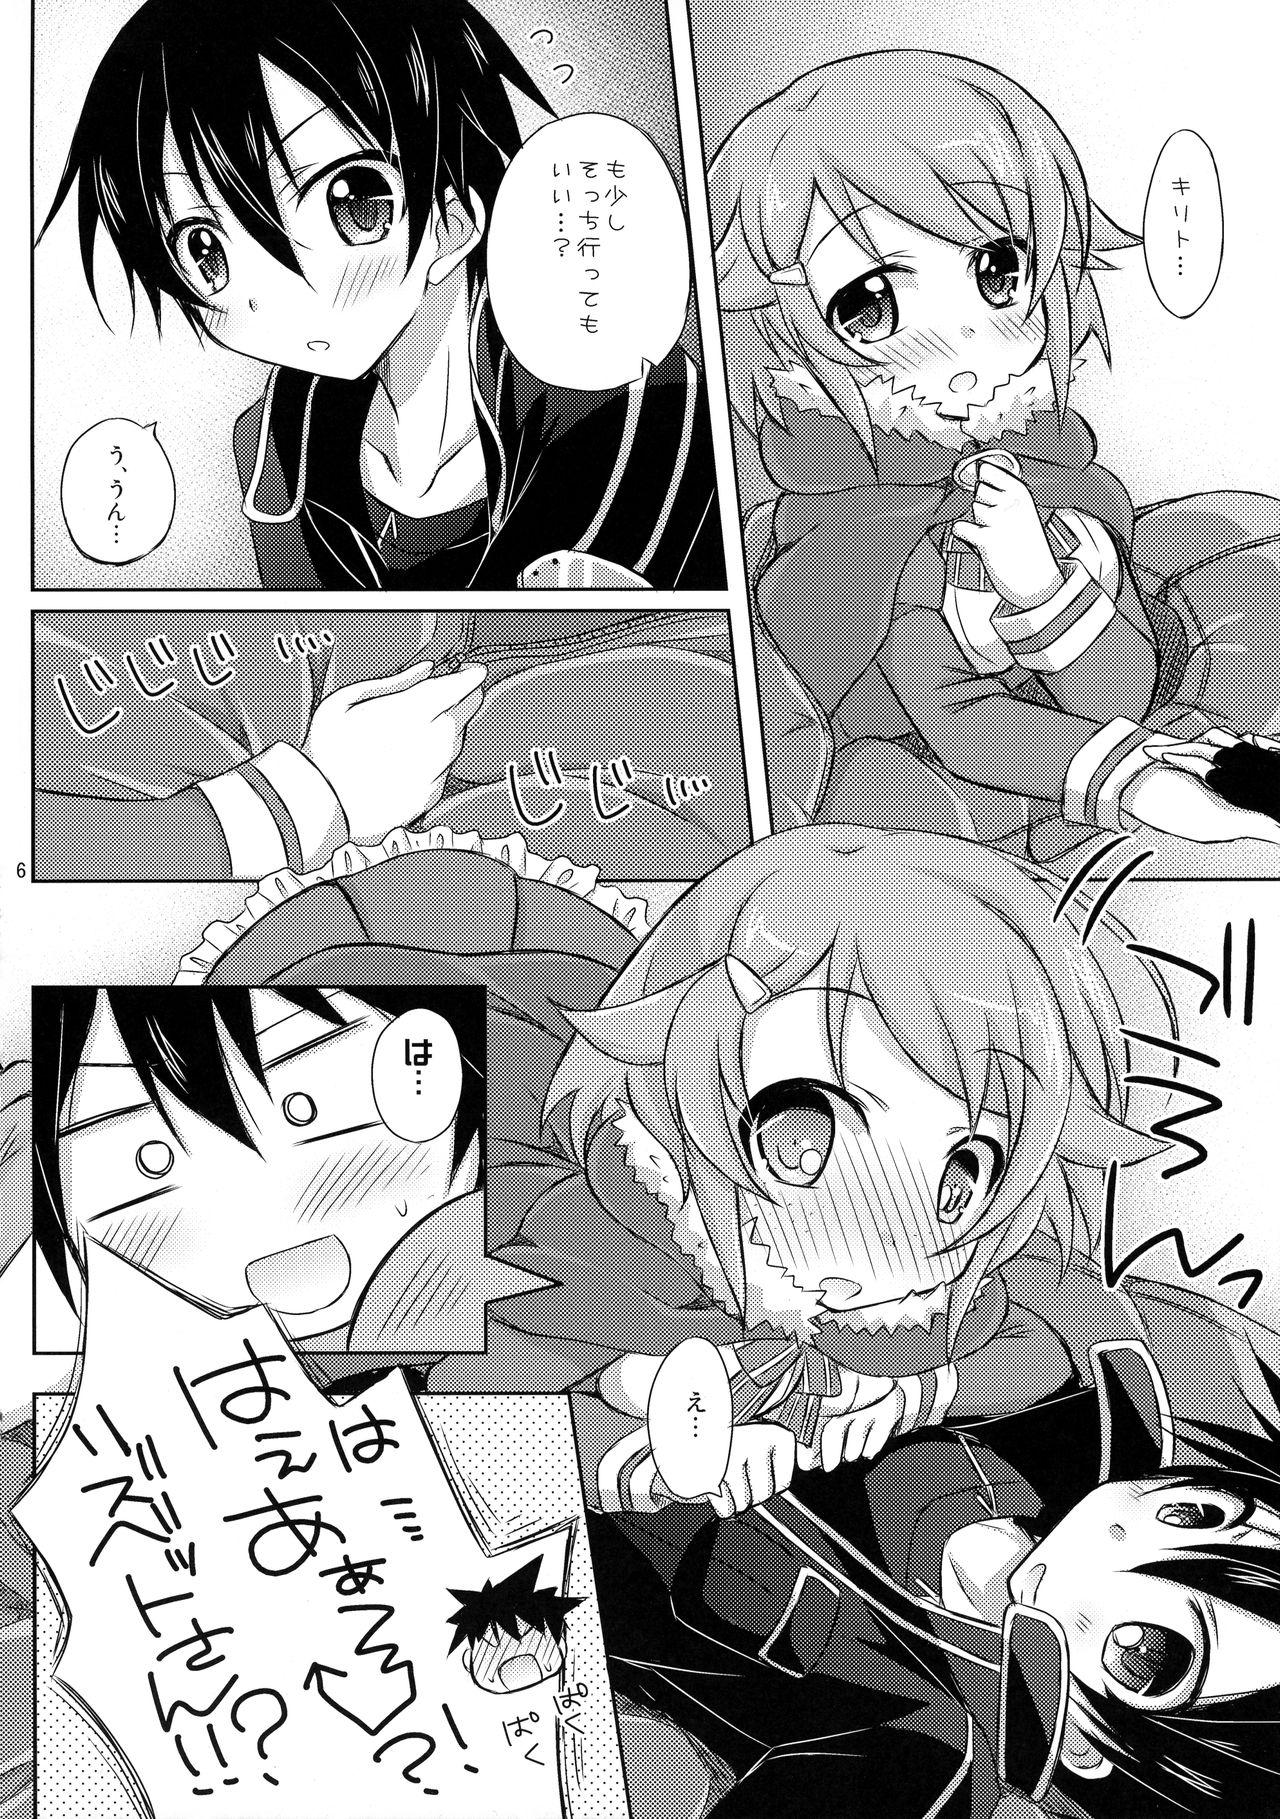 First Time Lisbeth Online - Sword art online Students - Page 5